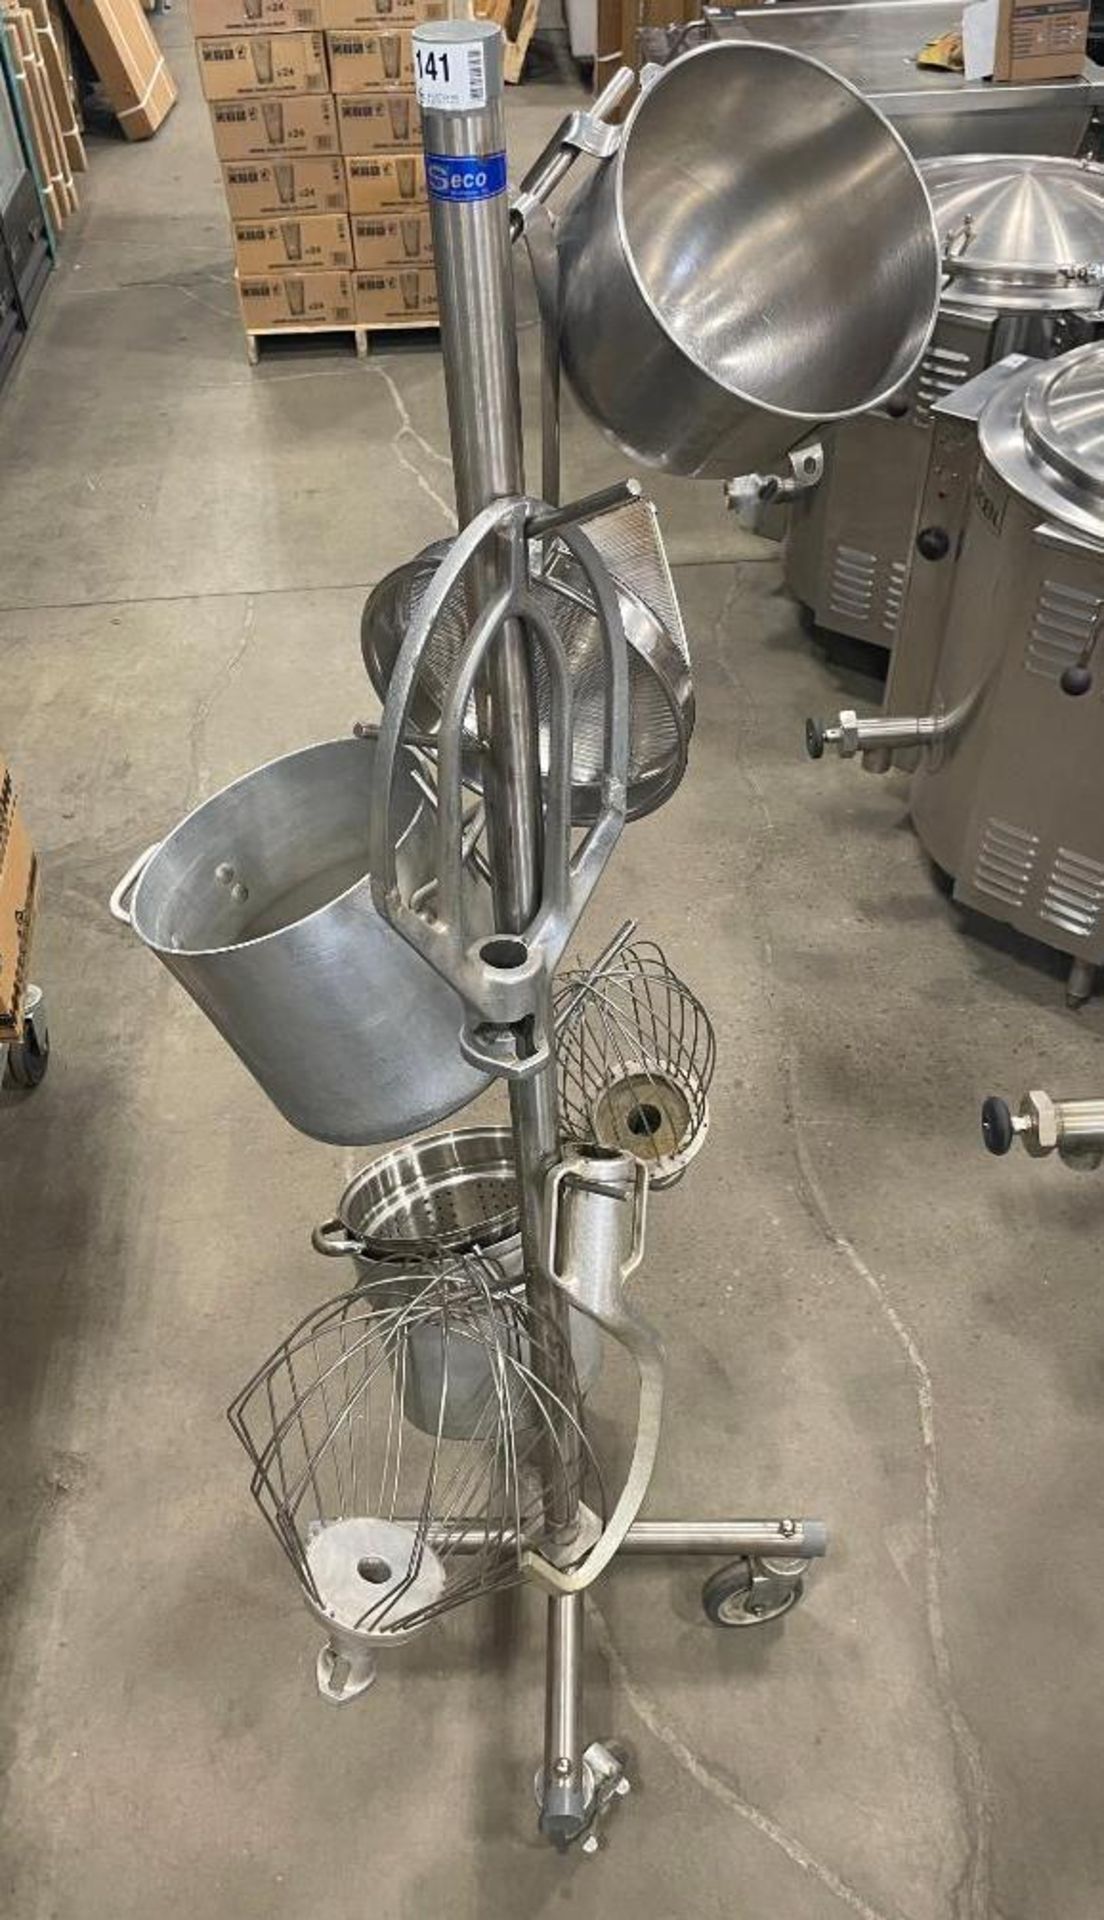 STAINLESS STEEL MOBILE ATTACHMENT STORAGE CART W/ MIXER ATTACHMENTS & ASSORTED POTS - Image 9 of 9